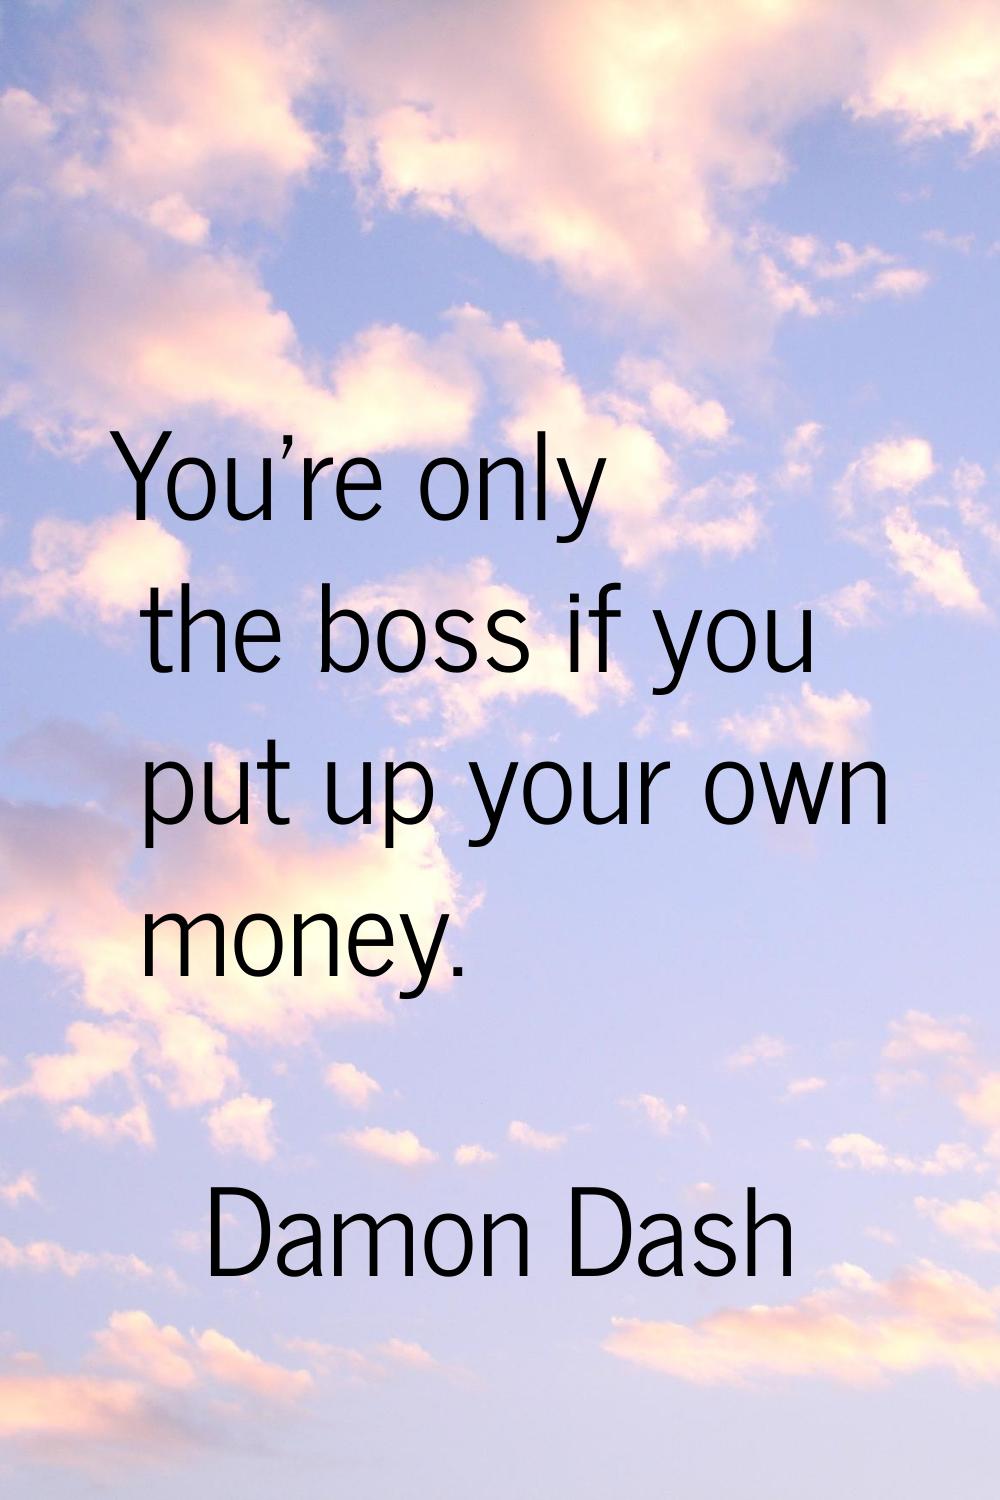 You're only the boss if you put up your own money.